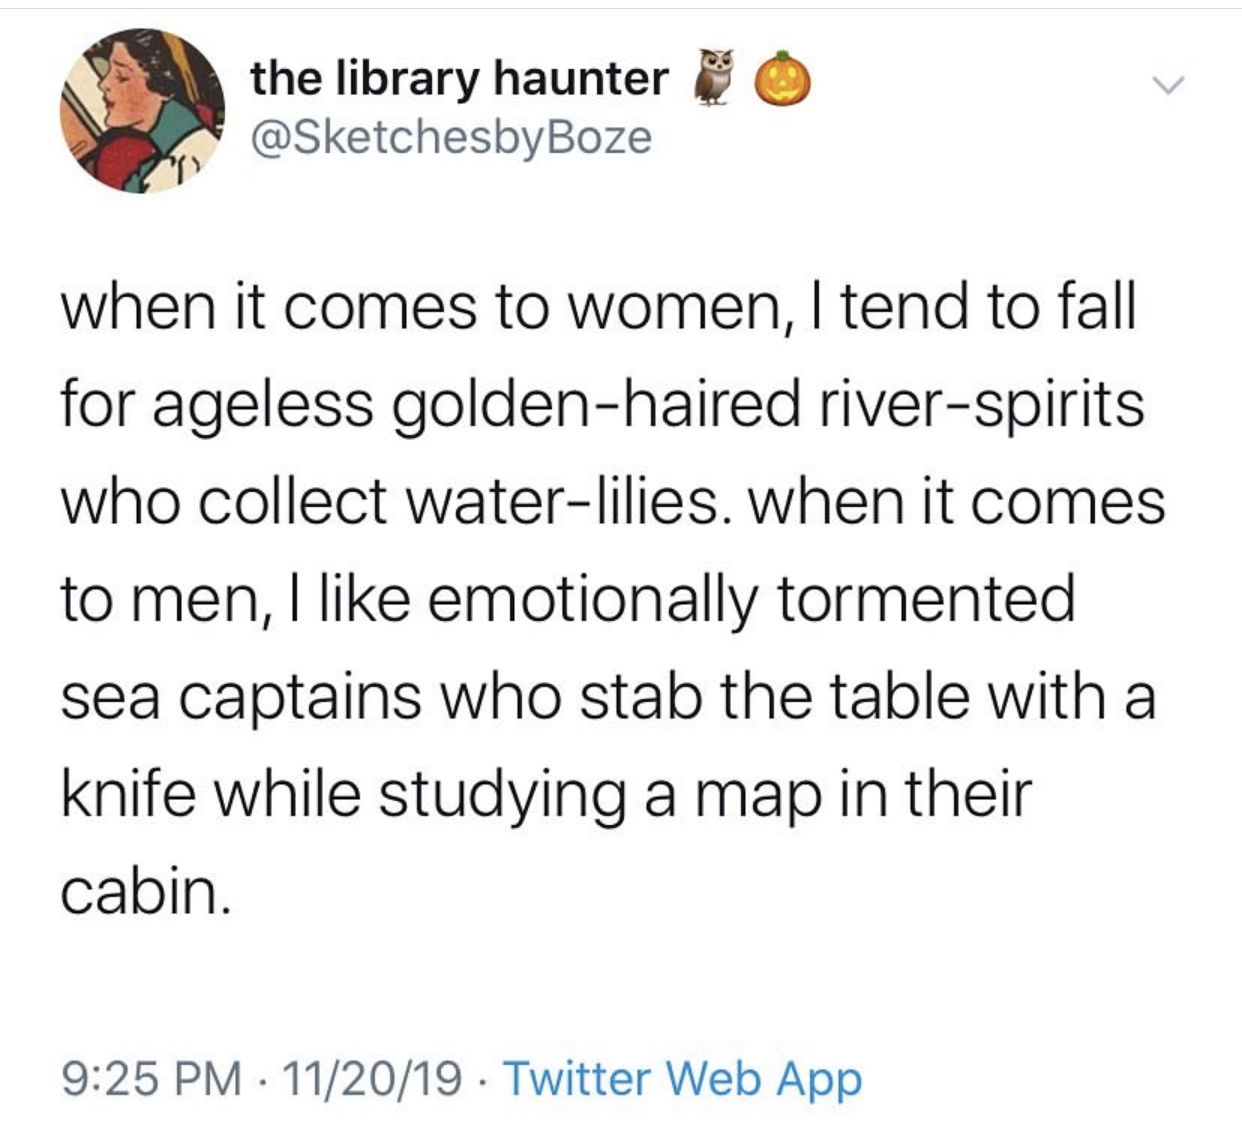 angle - the library haunter when it comes to women, I tend to fall for ageless goldenhaired riverspirits who collect waterlilies. when it comes to men, I emotionally tormented sea captains who stab the table with a knife while studying a map in their cabi